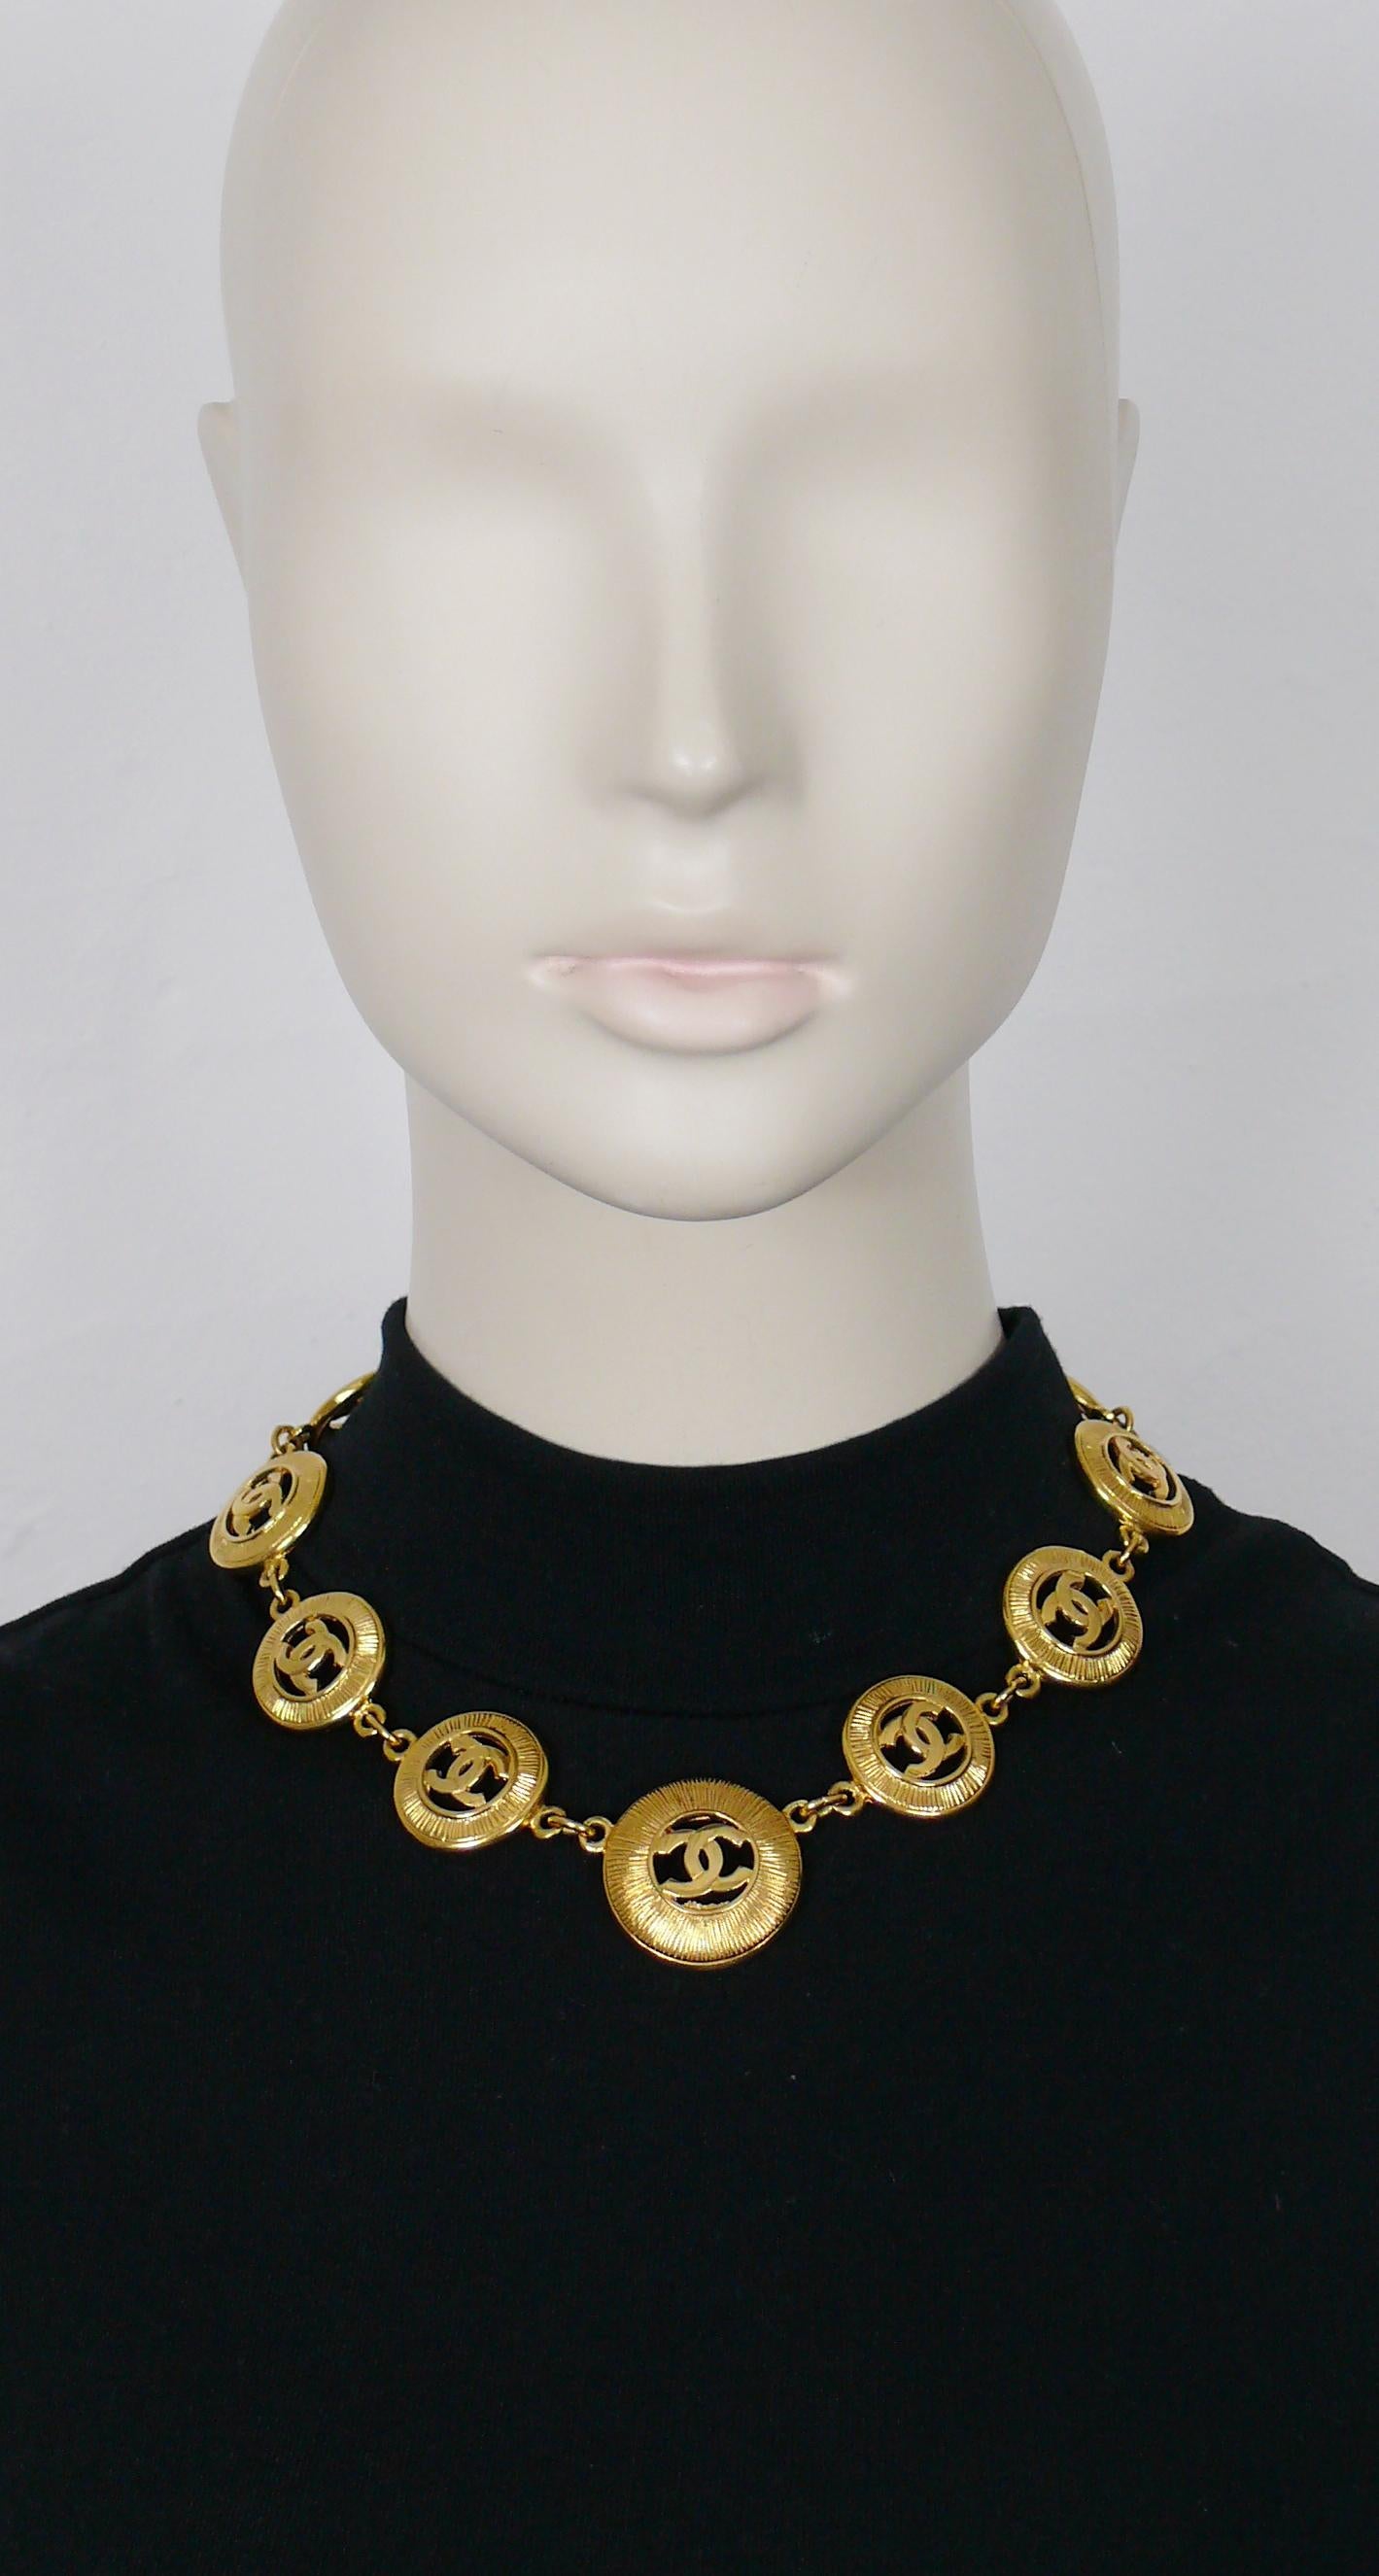 CHANEL vintage gold toned necklace featuring domed links with a sunburst design and openwork CC logos.

Spring clasp and toggle closure.
Missing the extension chain.

Embossed CHANEL Made in France.

Indicative measurements : length approx. 44 cm